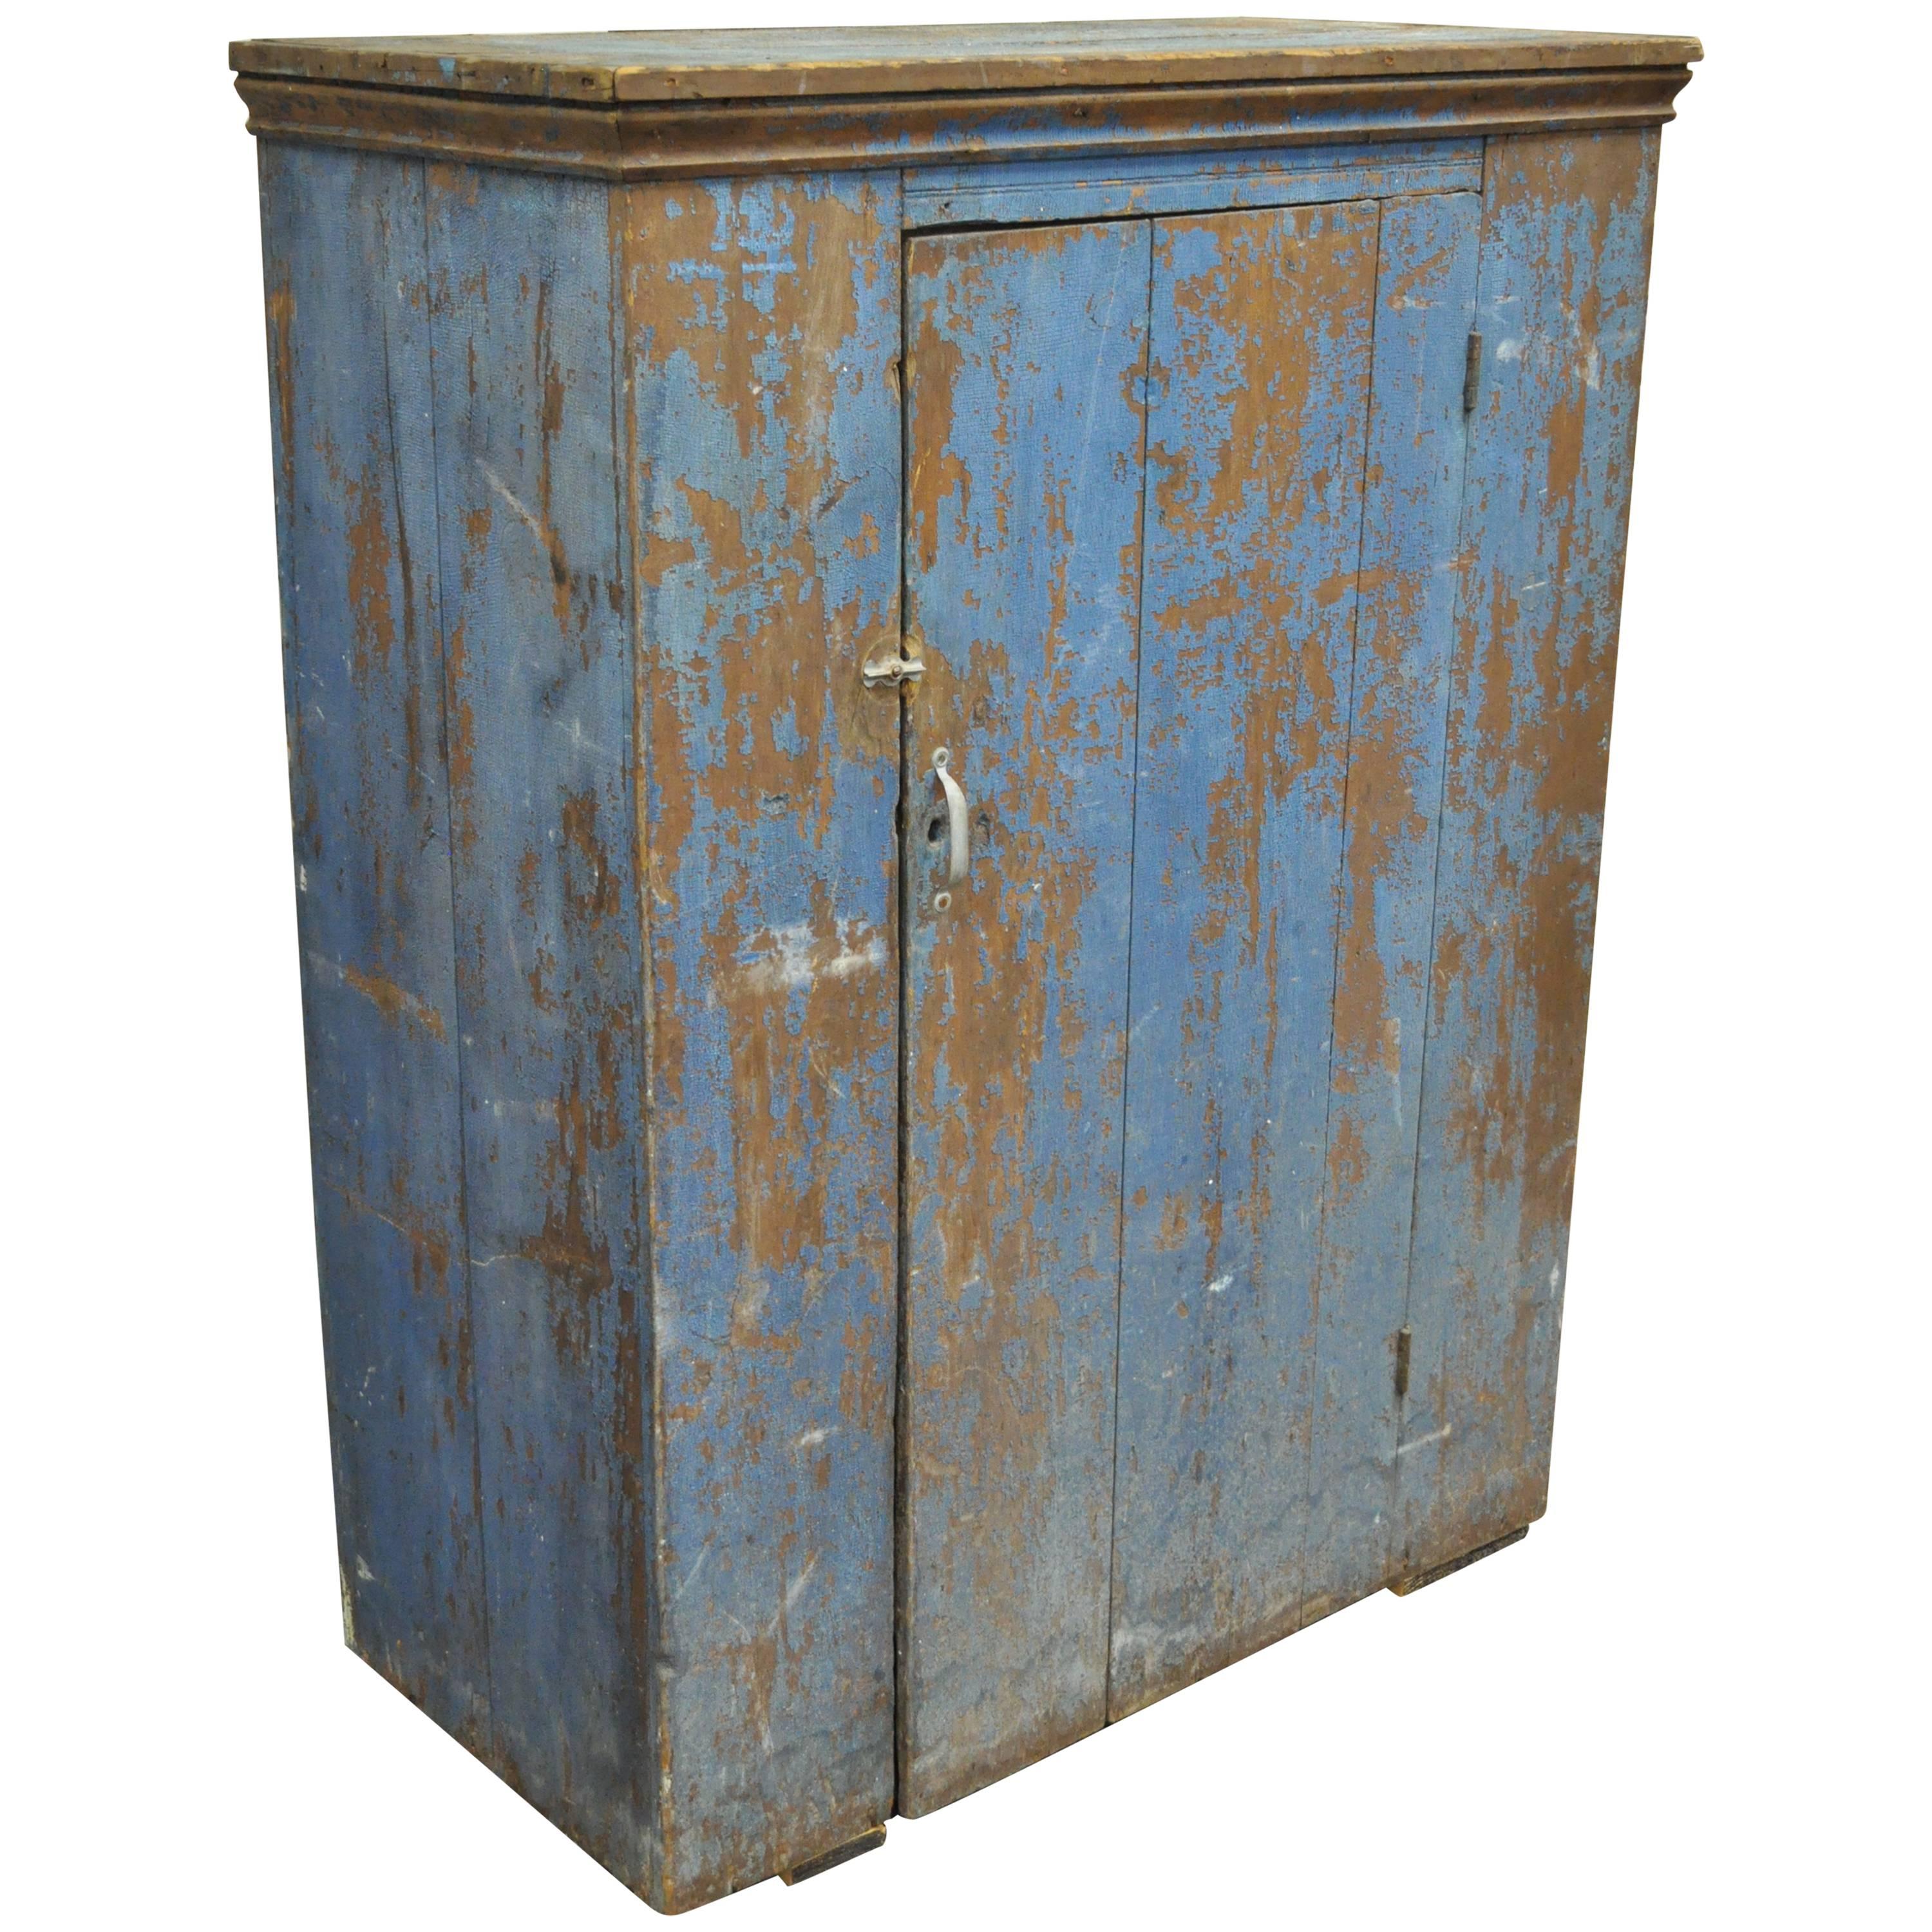 Antique Blue Distress Painted PA Rustic Primitive Jelly Cupboard Pantry Cabinet